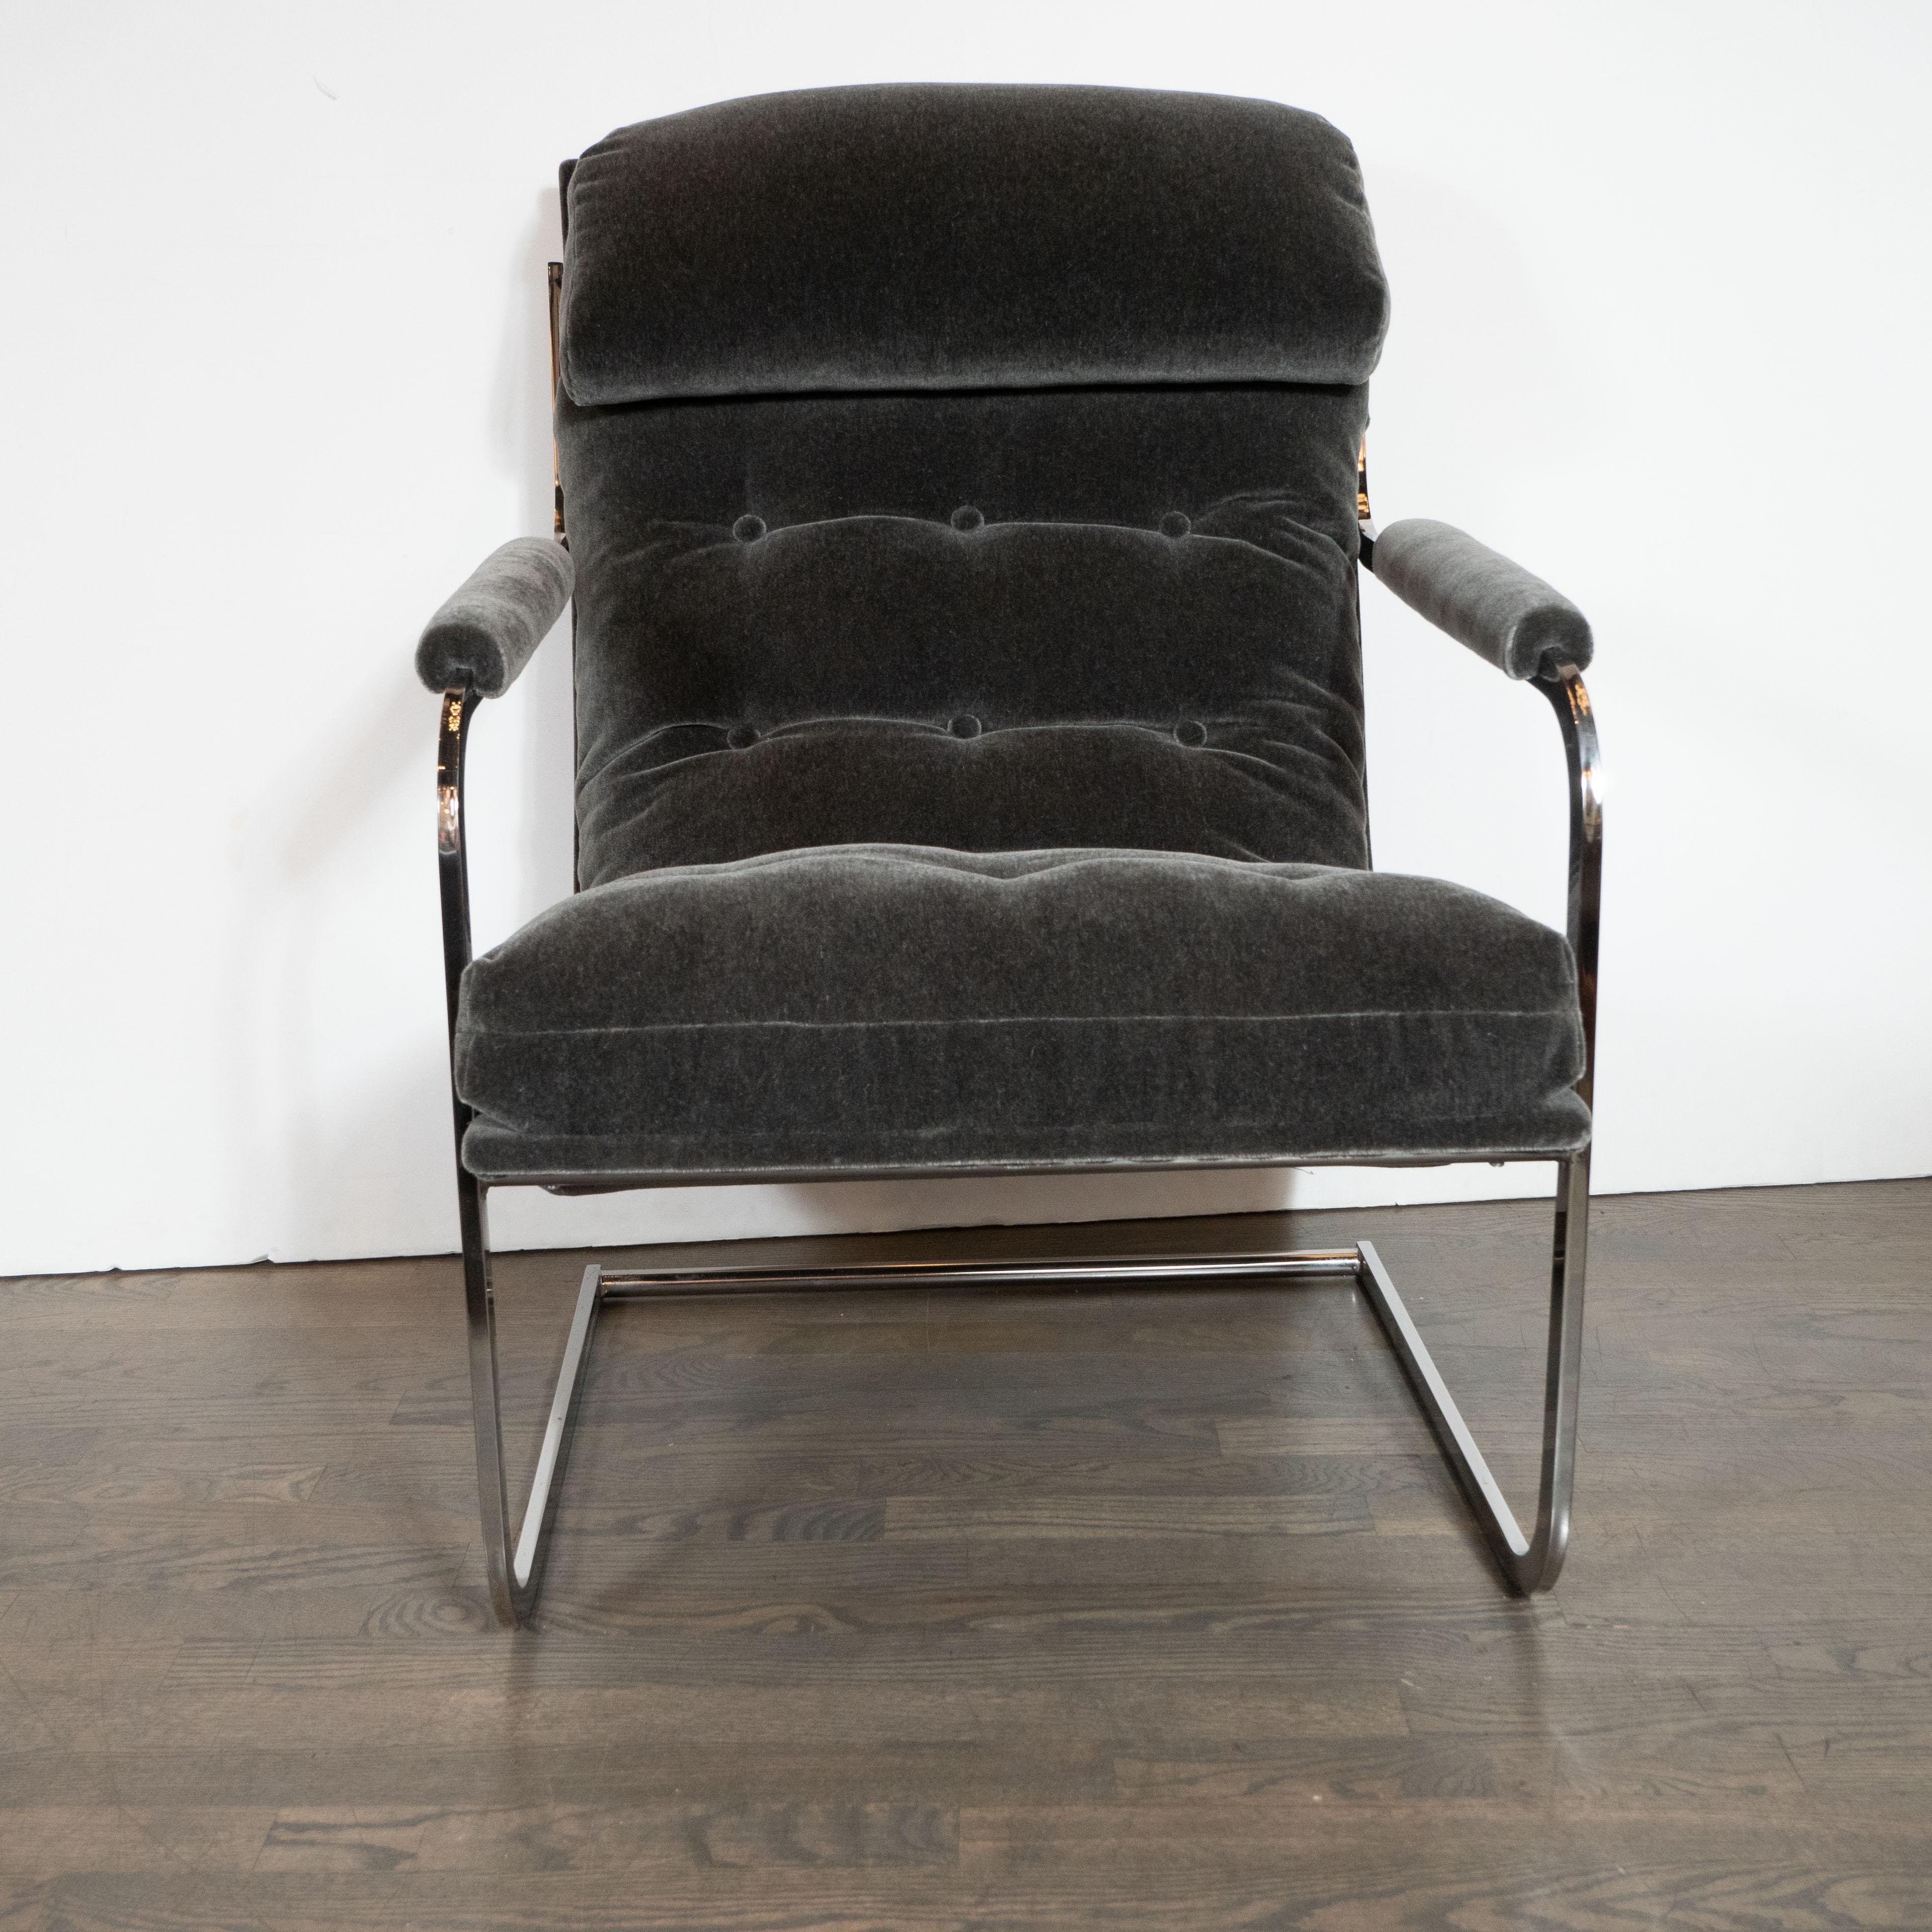 This dramatic and refined pair of Mid-Century Modern chairs were realized by the manufacturer Carsons of High Point in the United States, circa 1970. The feature tubular frames appear forged from a single piece of snaking lustrous chrome, that